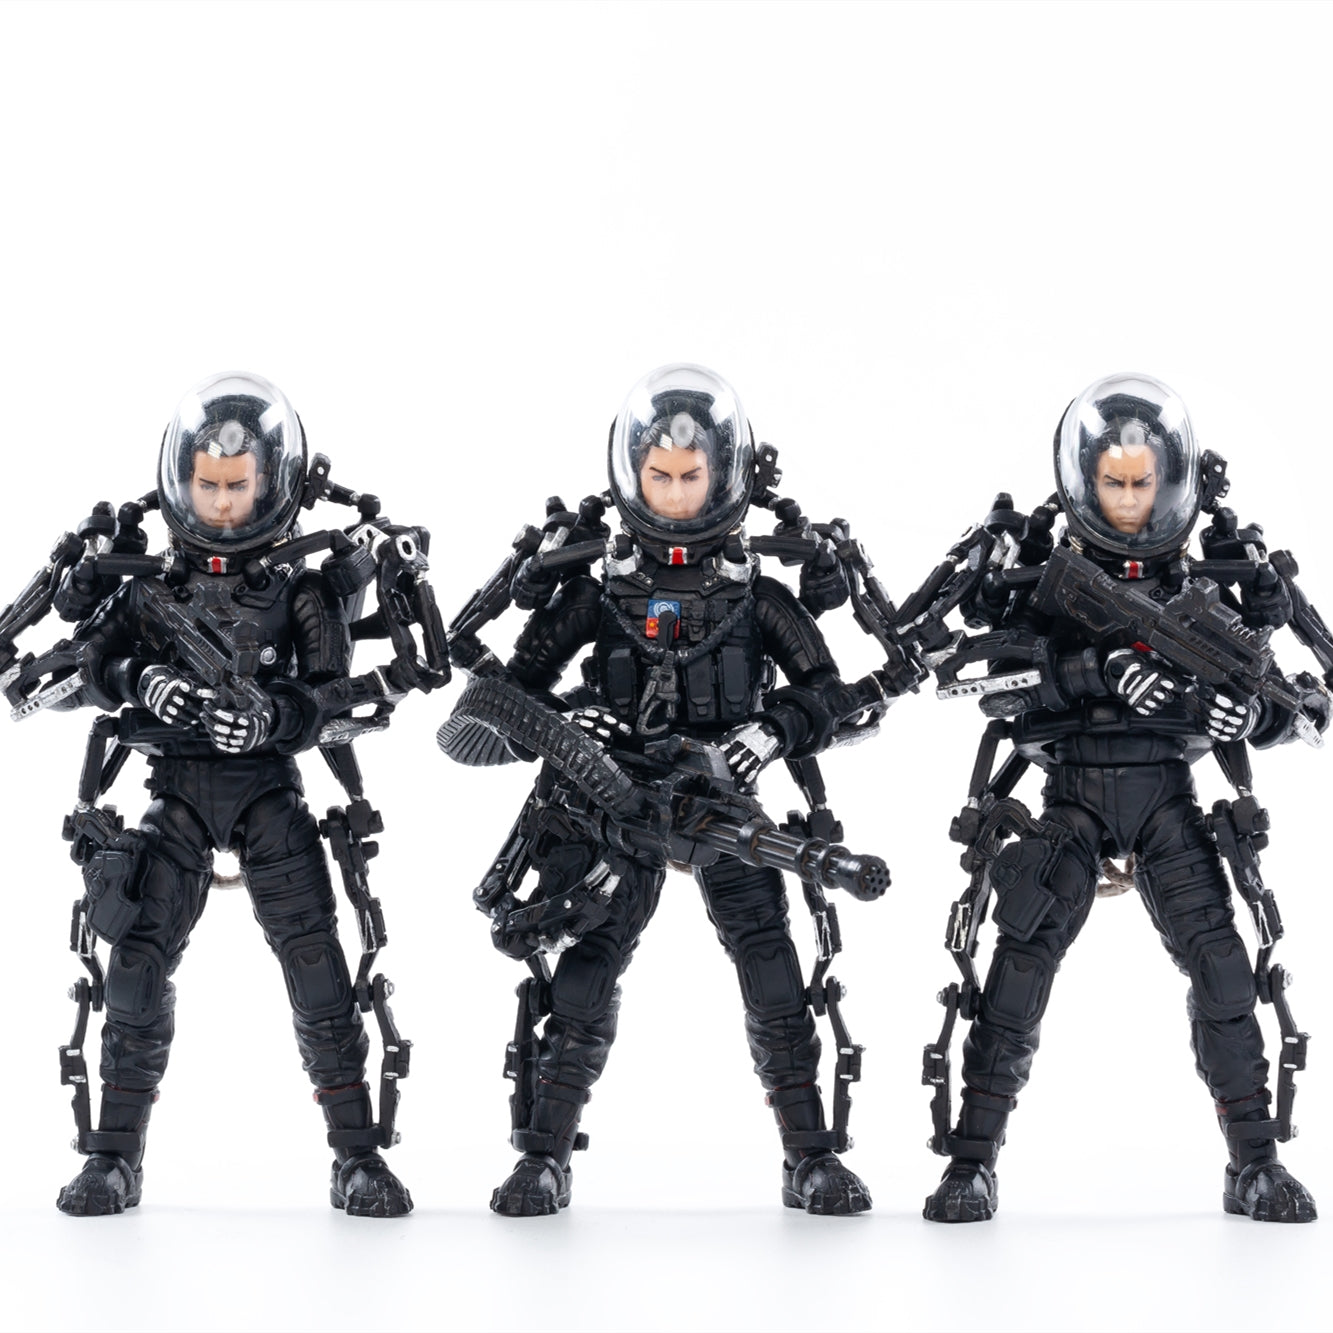 JoyToy 1/18 Action Figures 4-Inch The Wandering Earth United Earth Government China Rescue Team FM 1411 Default Title Official Joytoy Online Merch